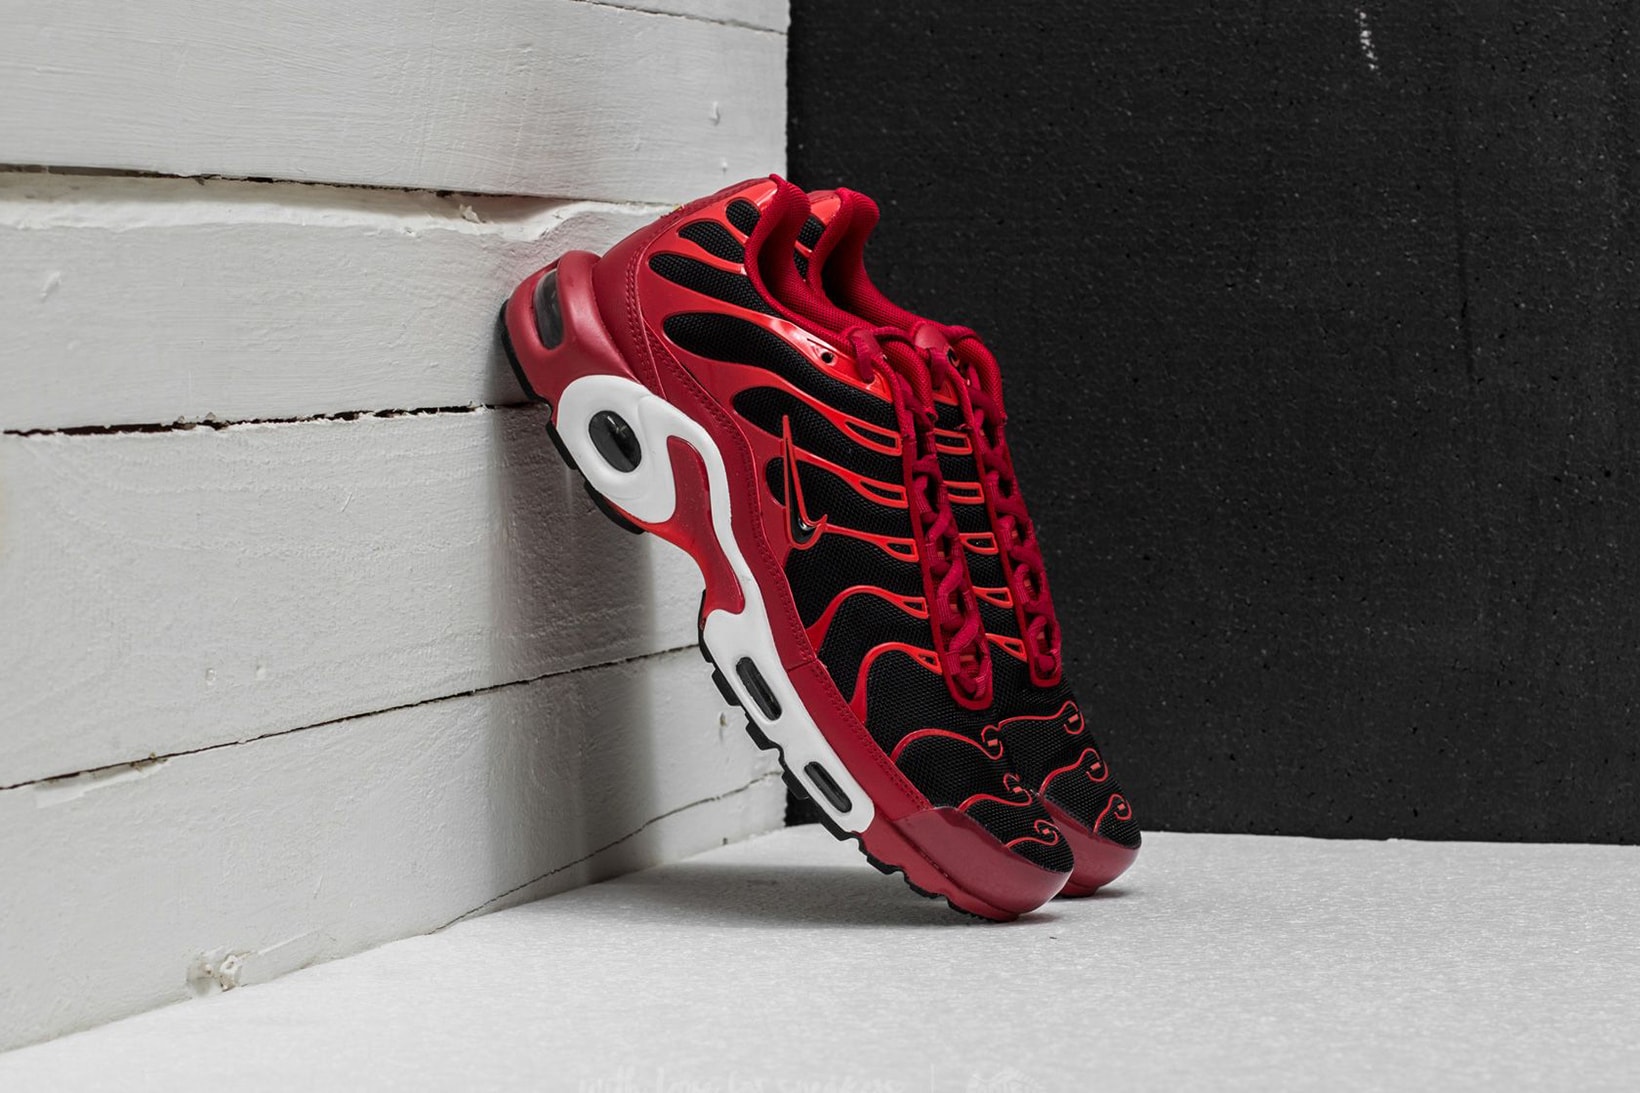 Nike Air Max Plus Chile Red White Black Footwear Release Info Date Drops